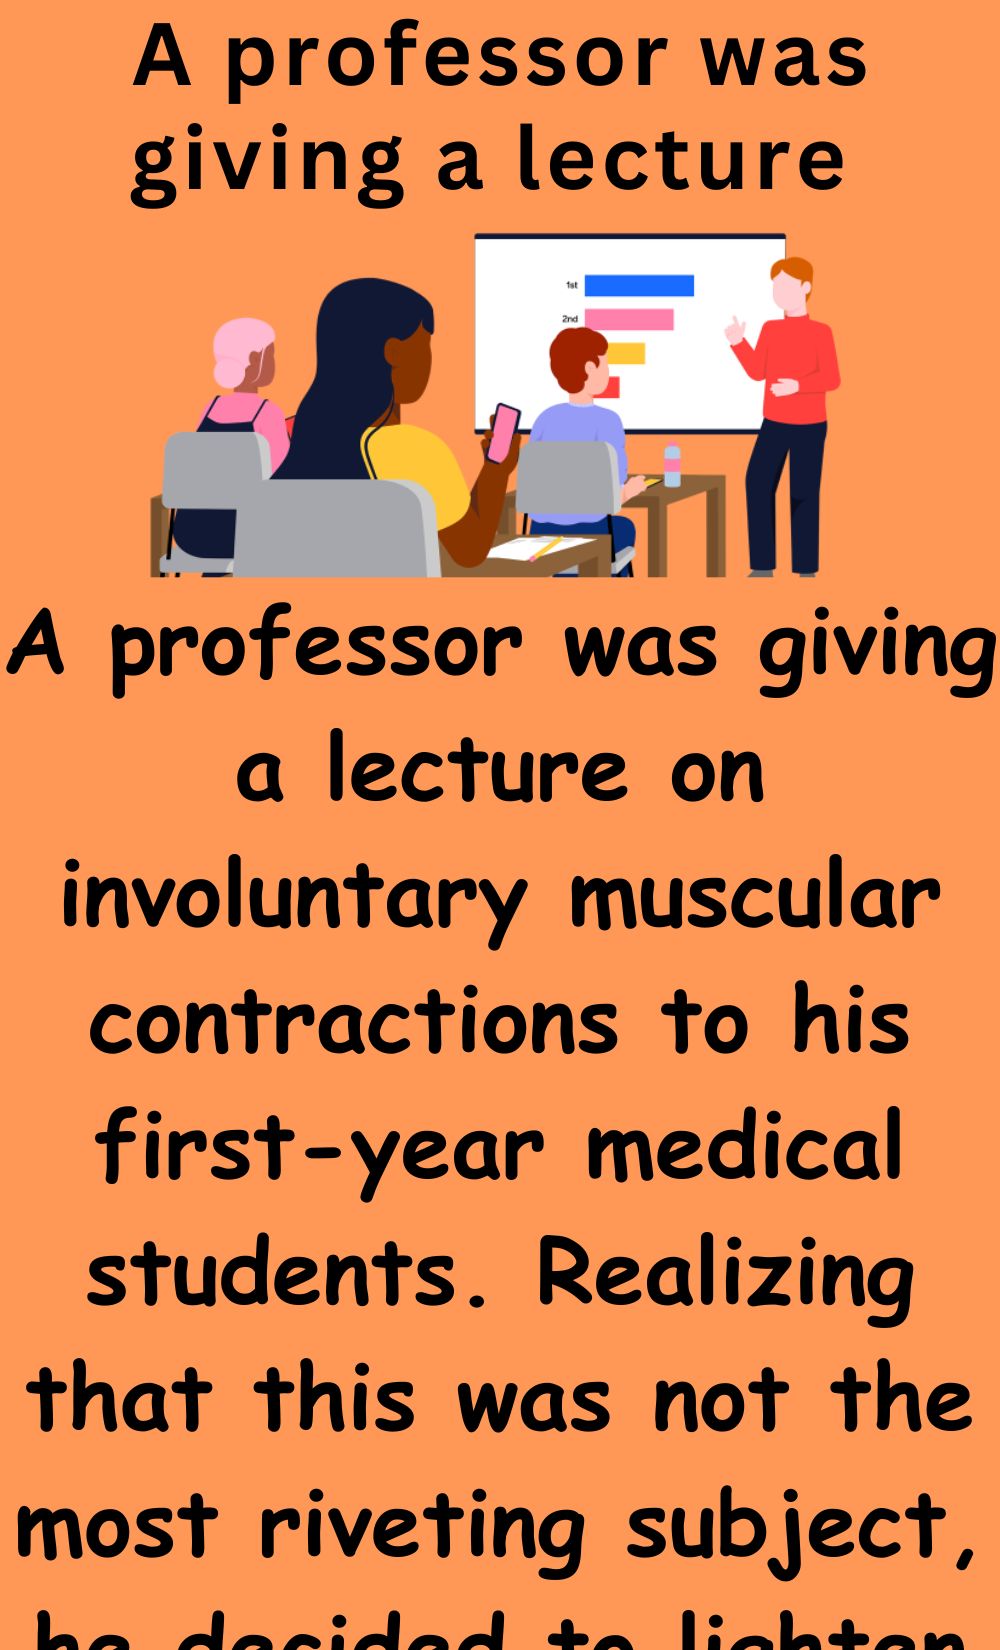 A professor was giving a lecture